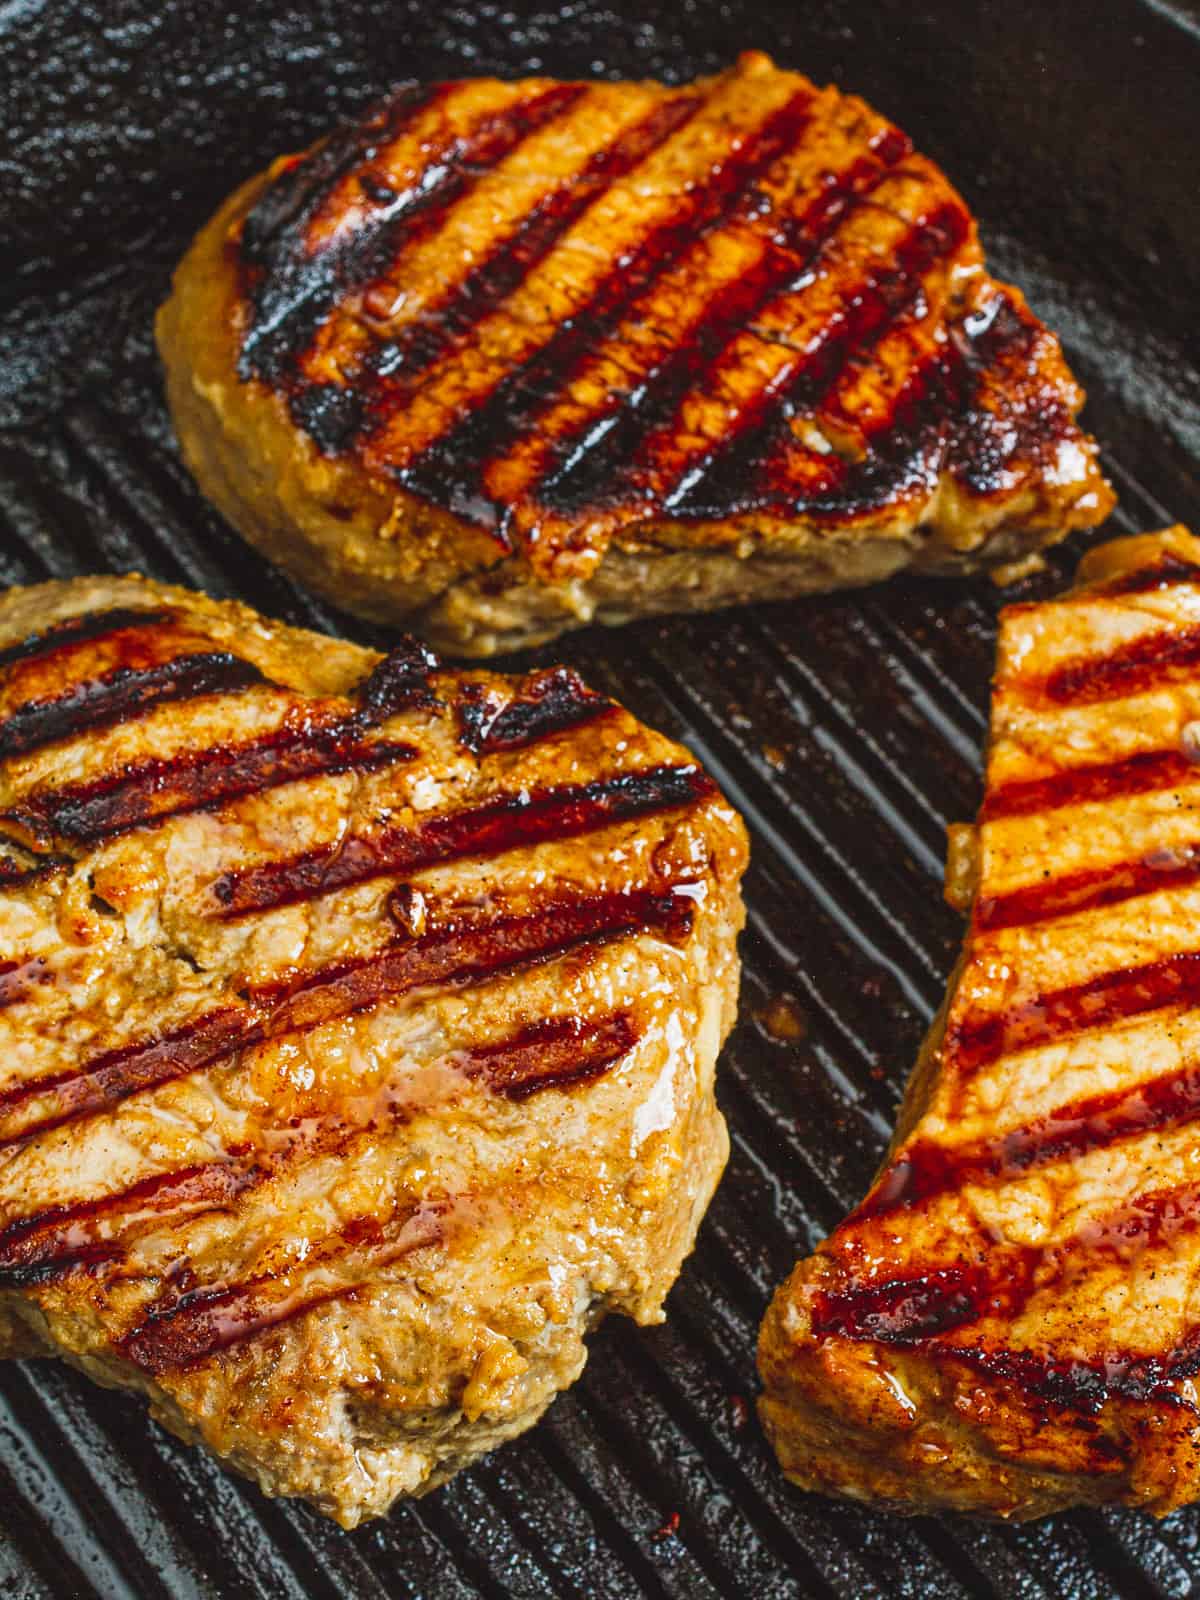 grilled hawaiian pork chops after flipping — you can see distinct grill marks.